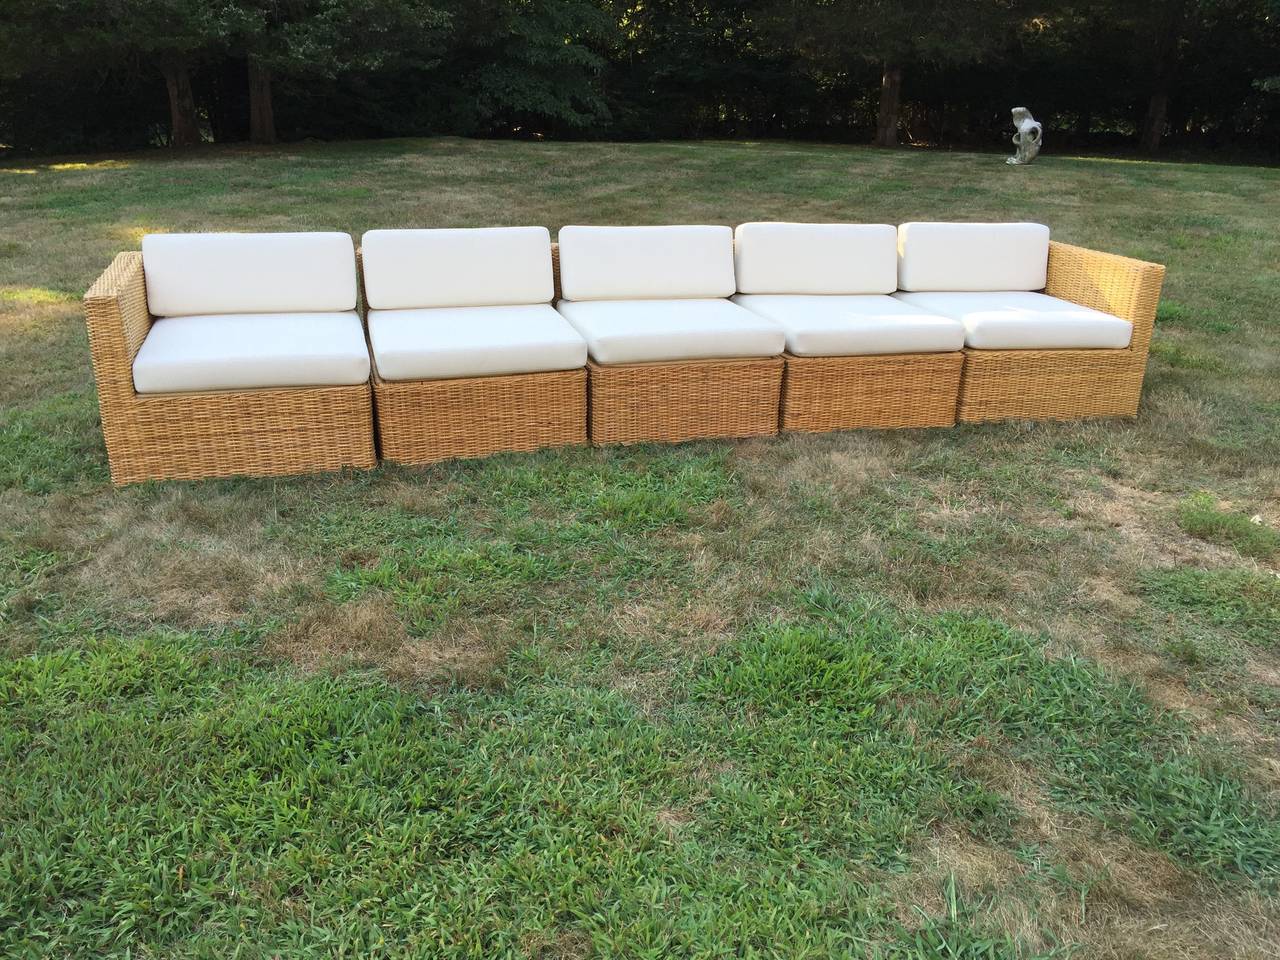 Michael Taylor five-piece wicker/rattan weaved vintage sectional sofa and chairs. Multi-function and set up, also in another listing two club chairs from the same estate, sizes are corner pieces 33''x 29 wide 26'' high back and 17'' seat height,